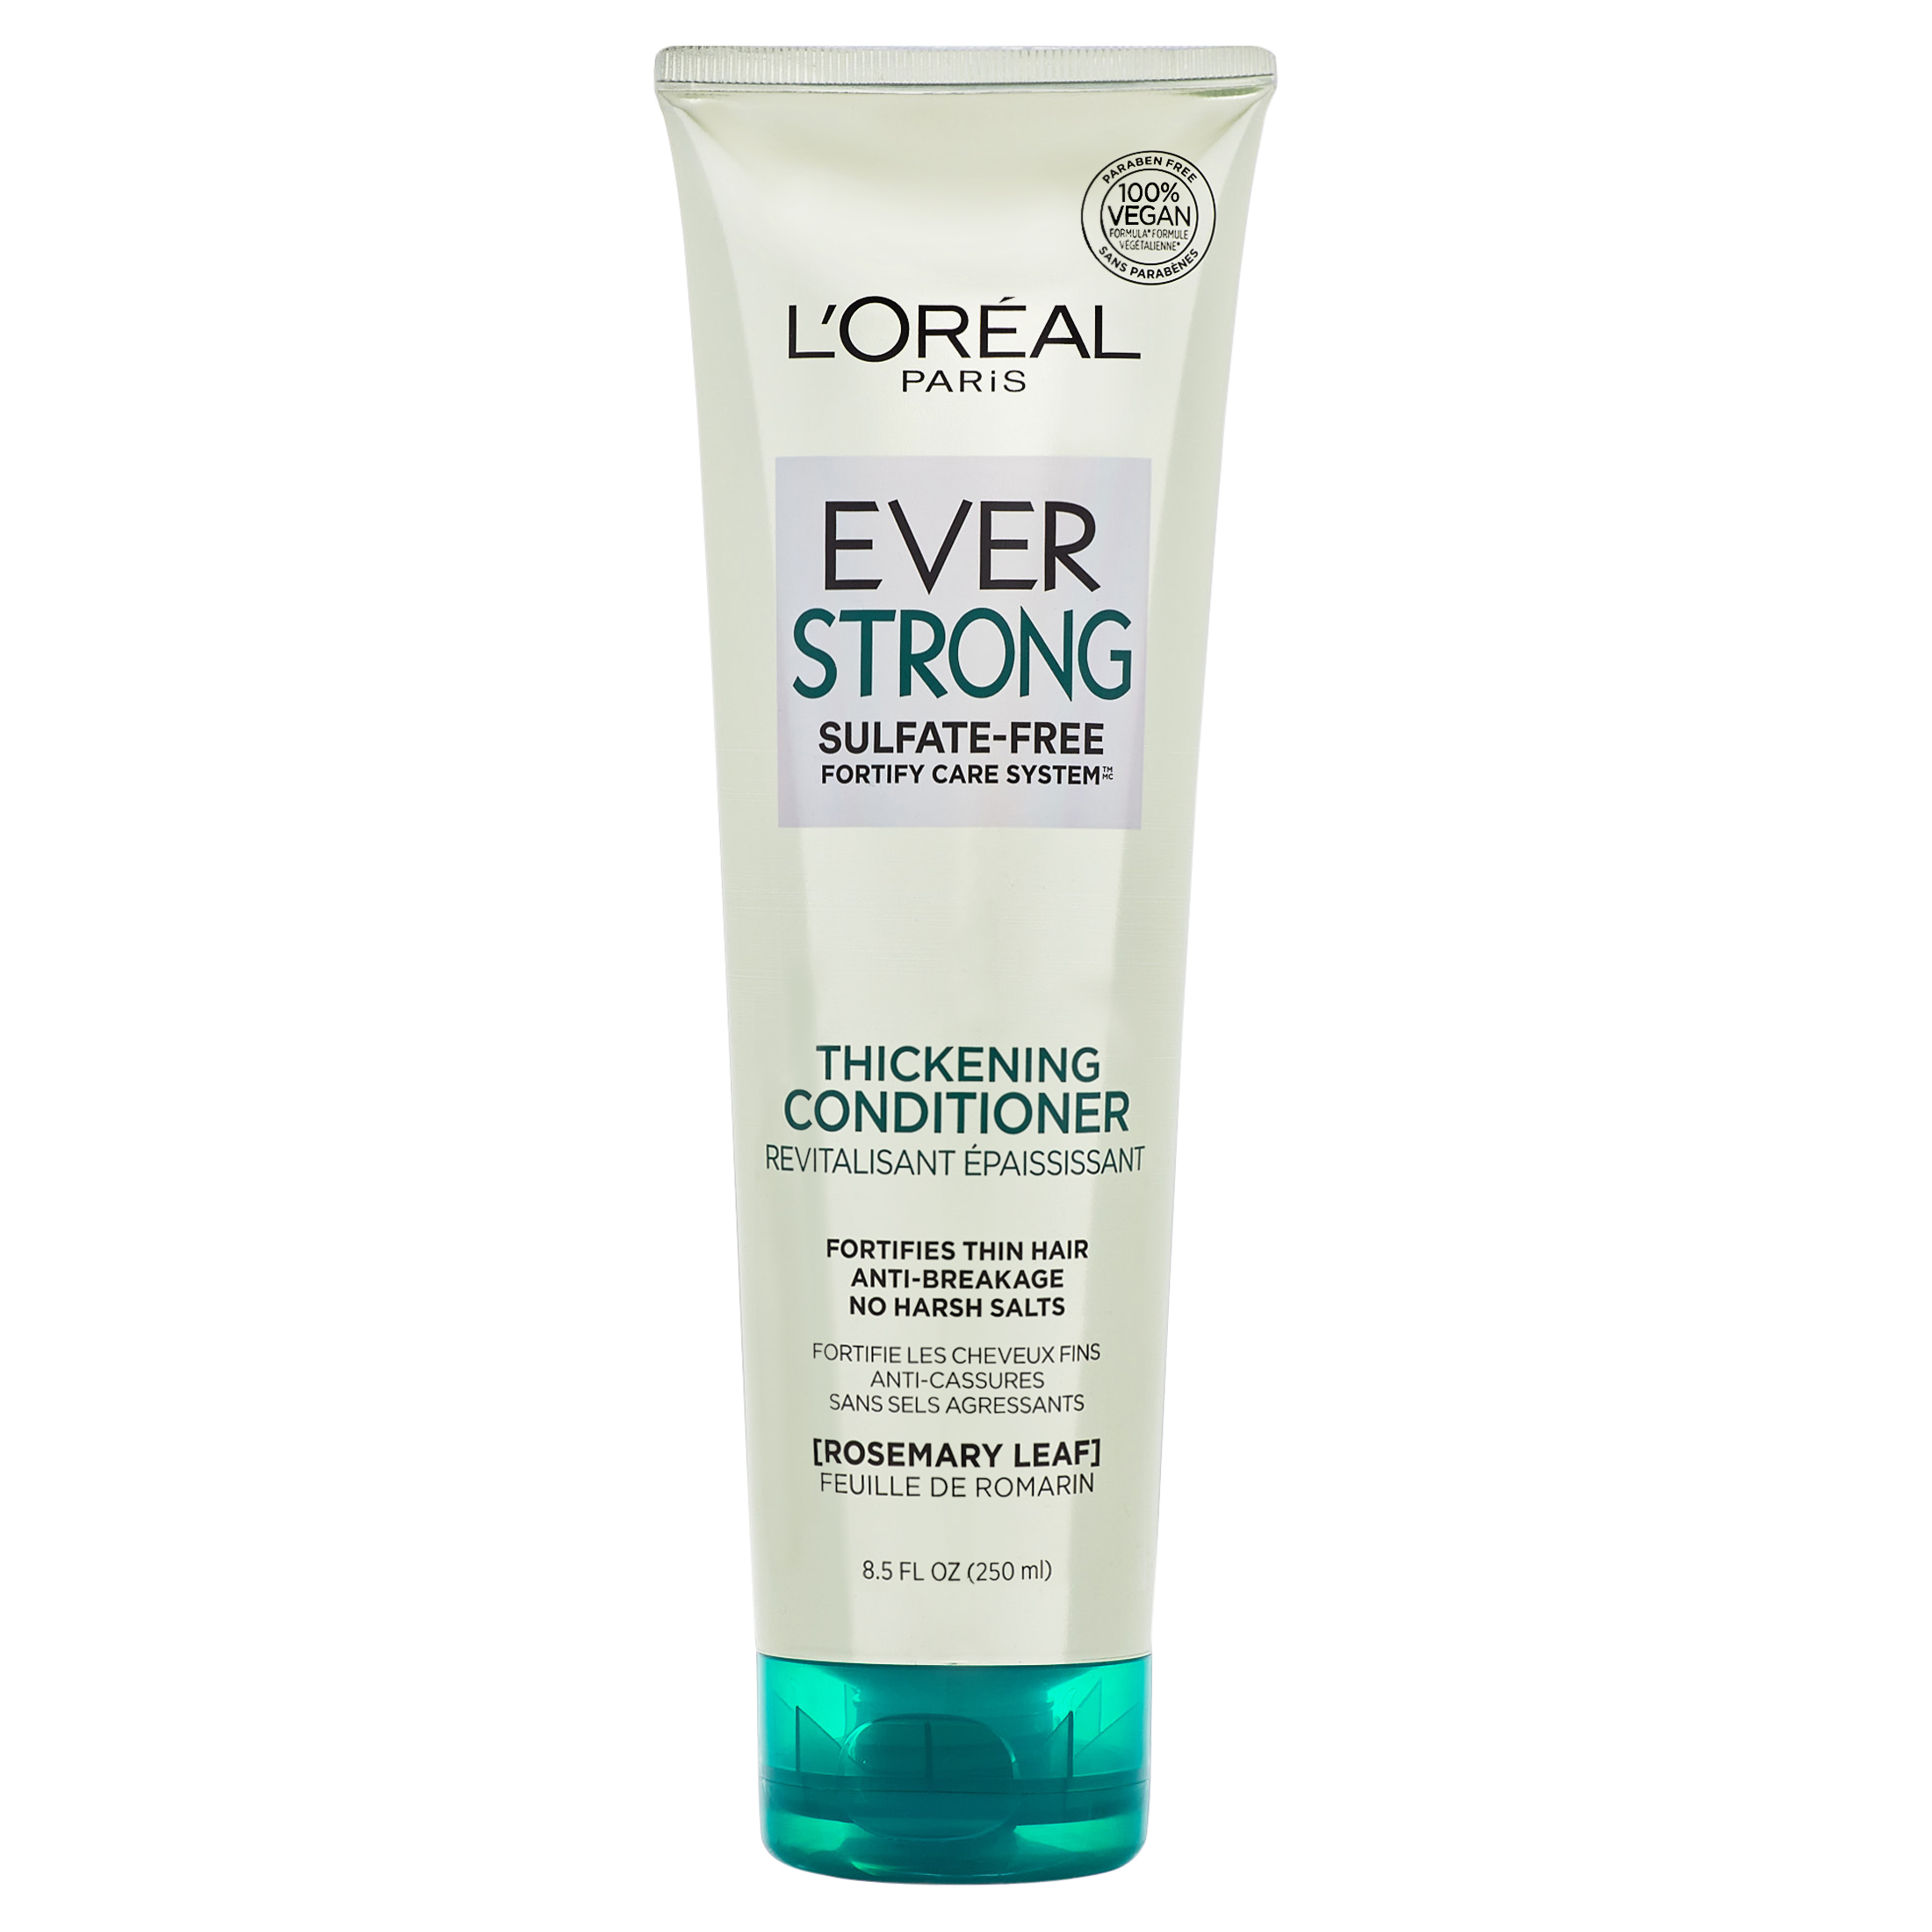 L'Oreal EverStrong Thickening Sulfate Free Conditioner, 8.5 fl oz - image 1 of 8